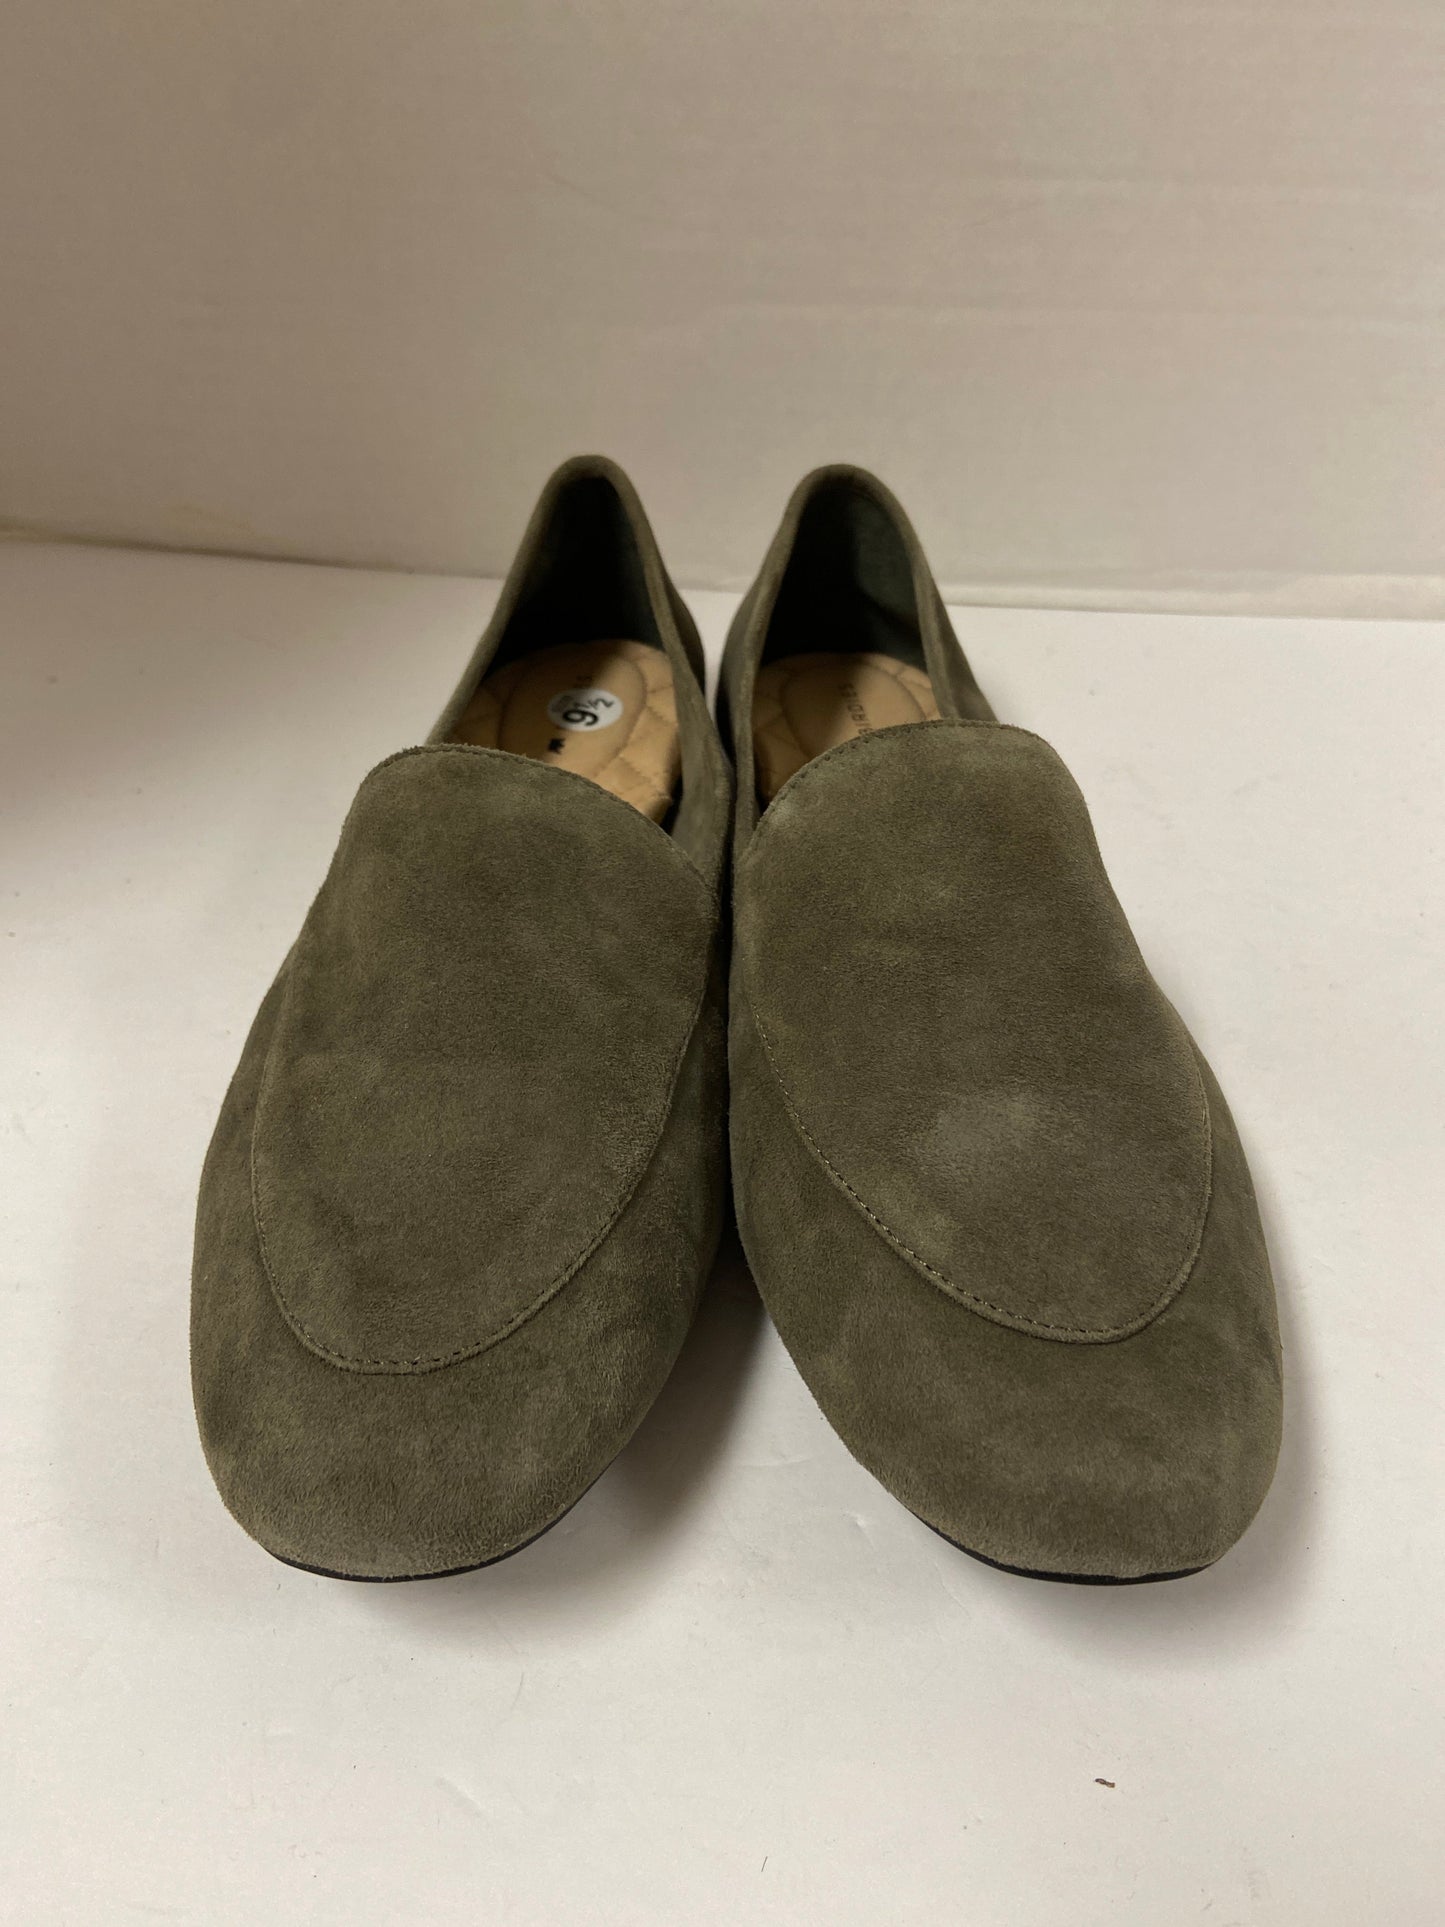 Shoes Flats Loafer Oxford By Clothes Mentor  Size: 9.5